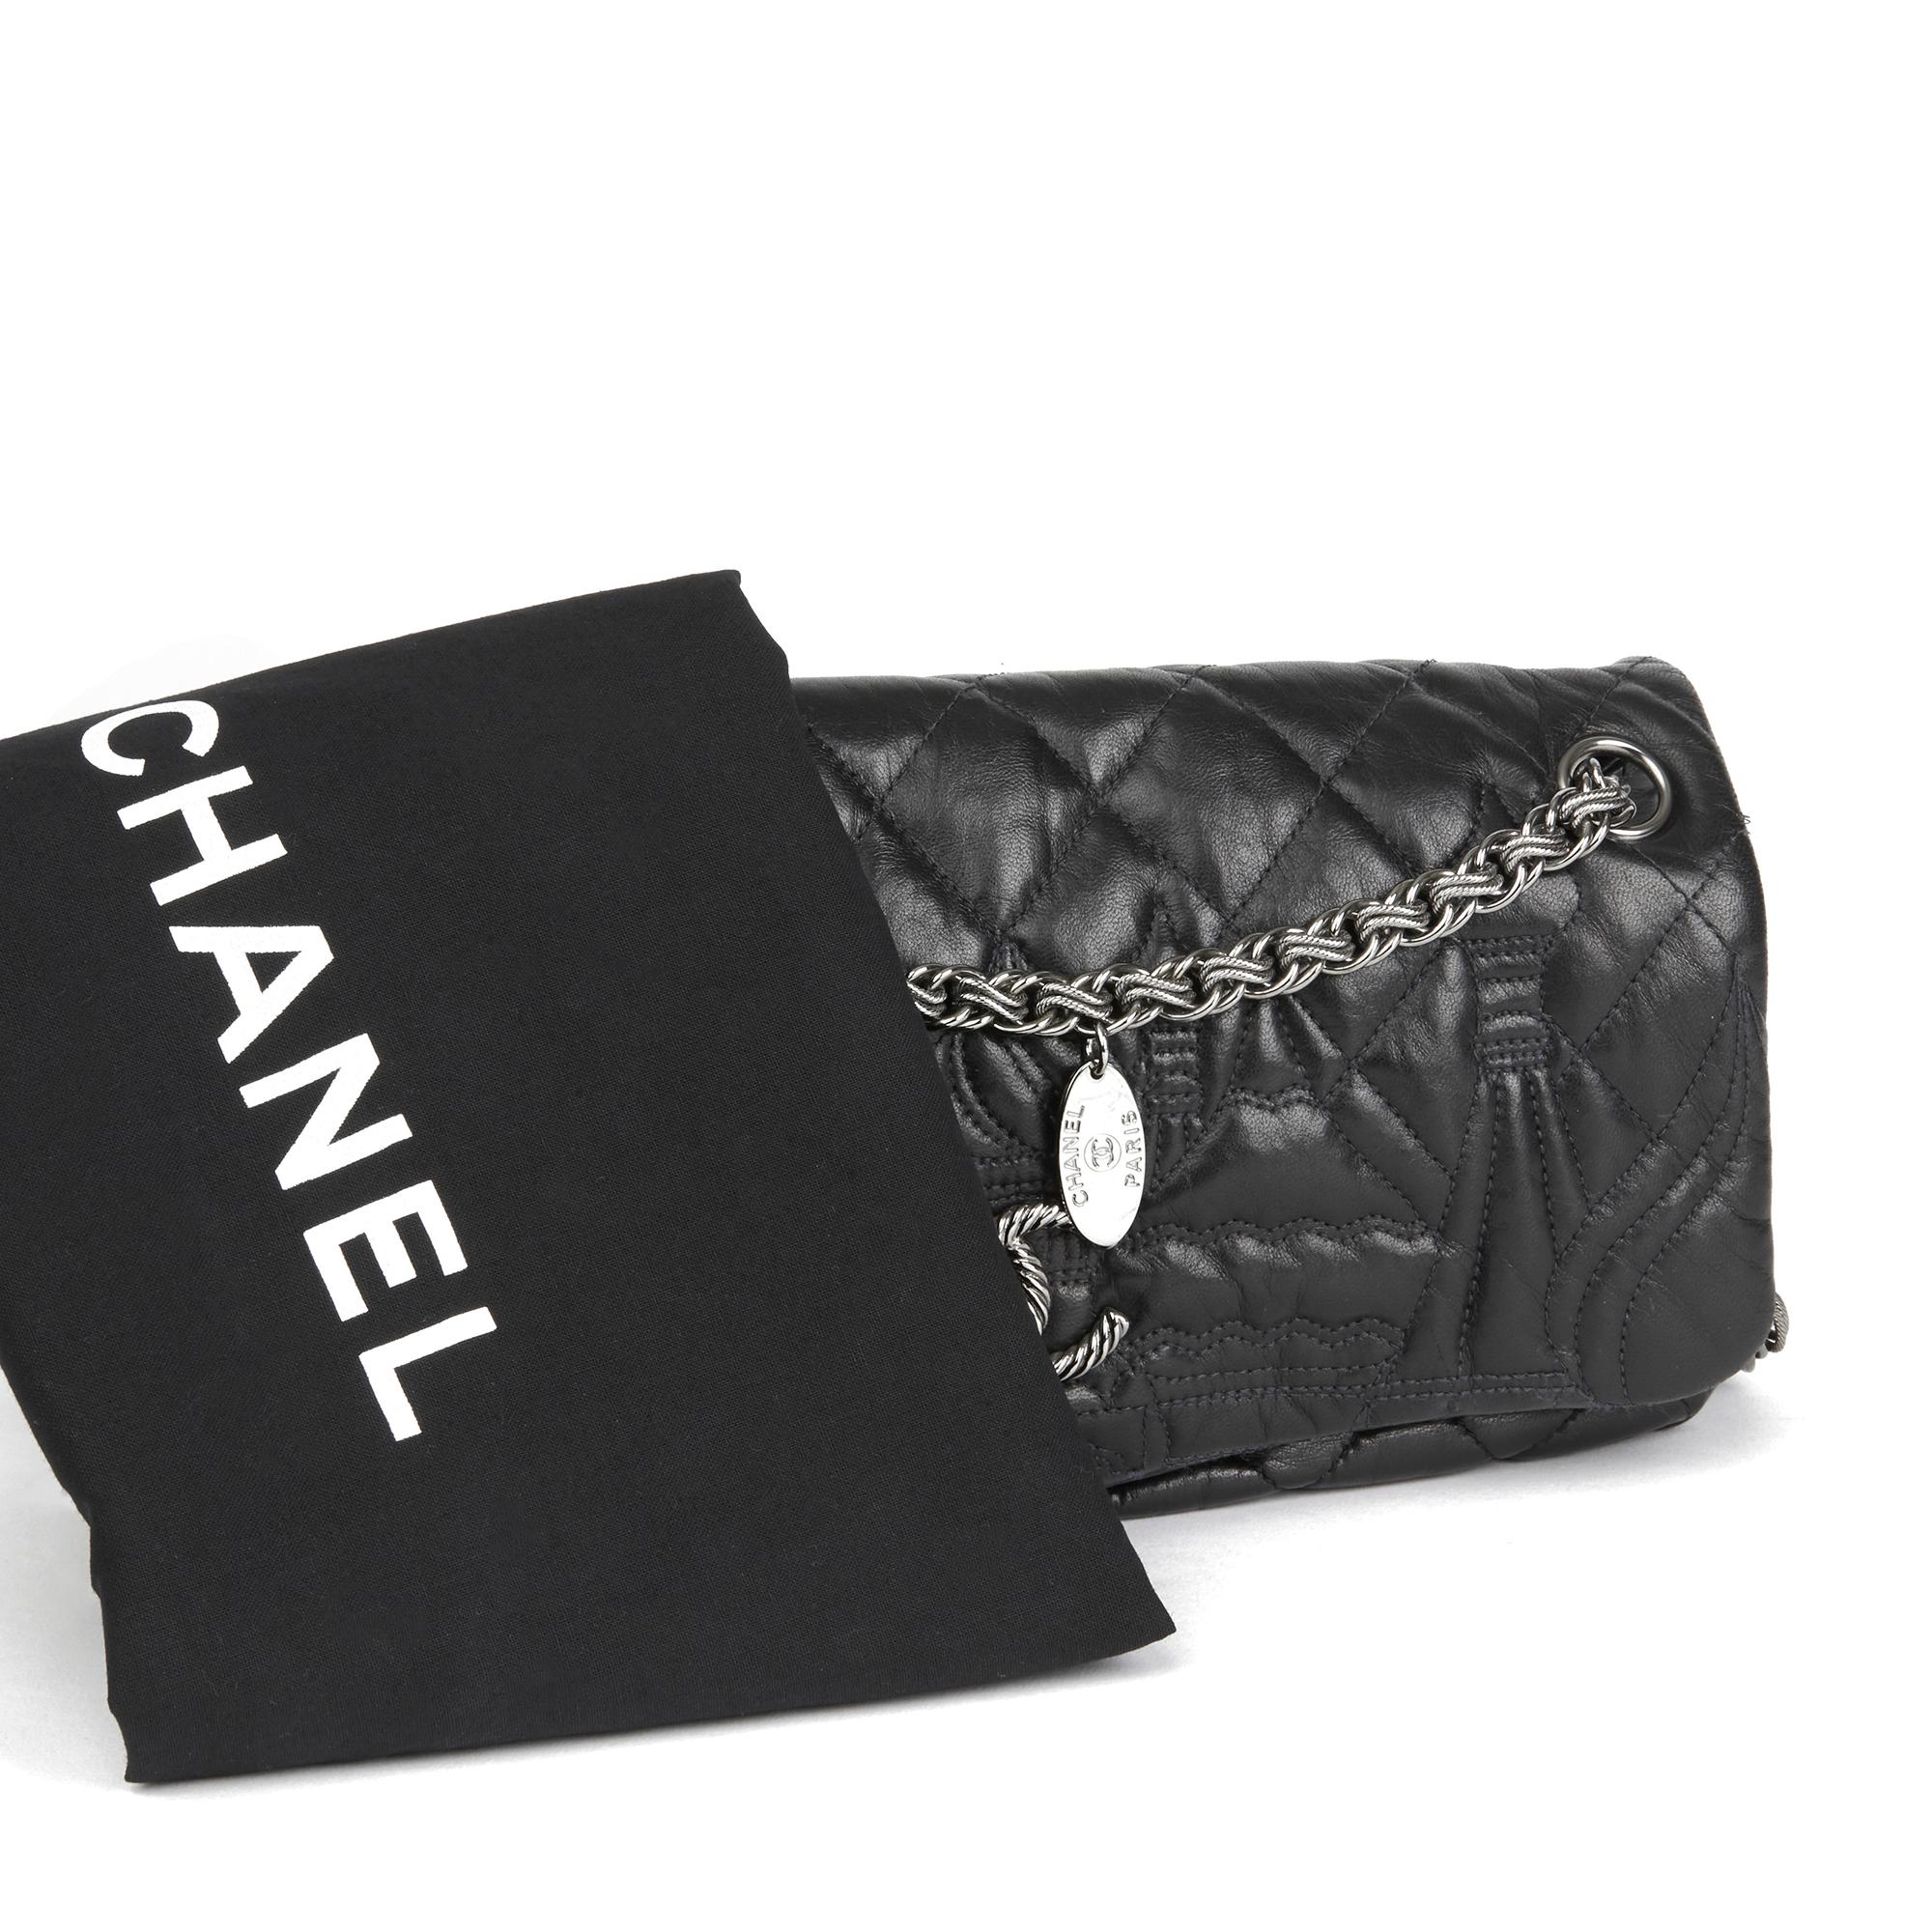 2009 Chanel Black Quilted Lambskin Leather Paris-Moscou Red Quare Flap Bag 6